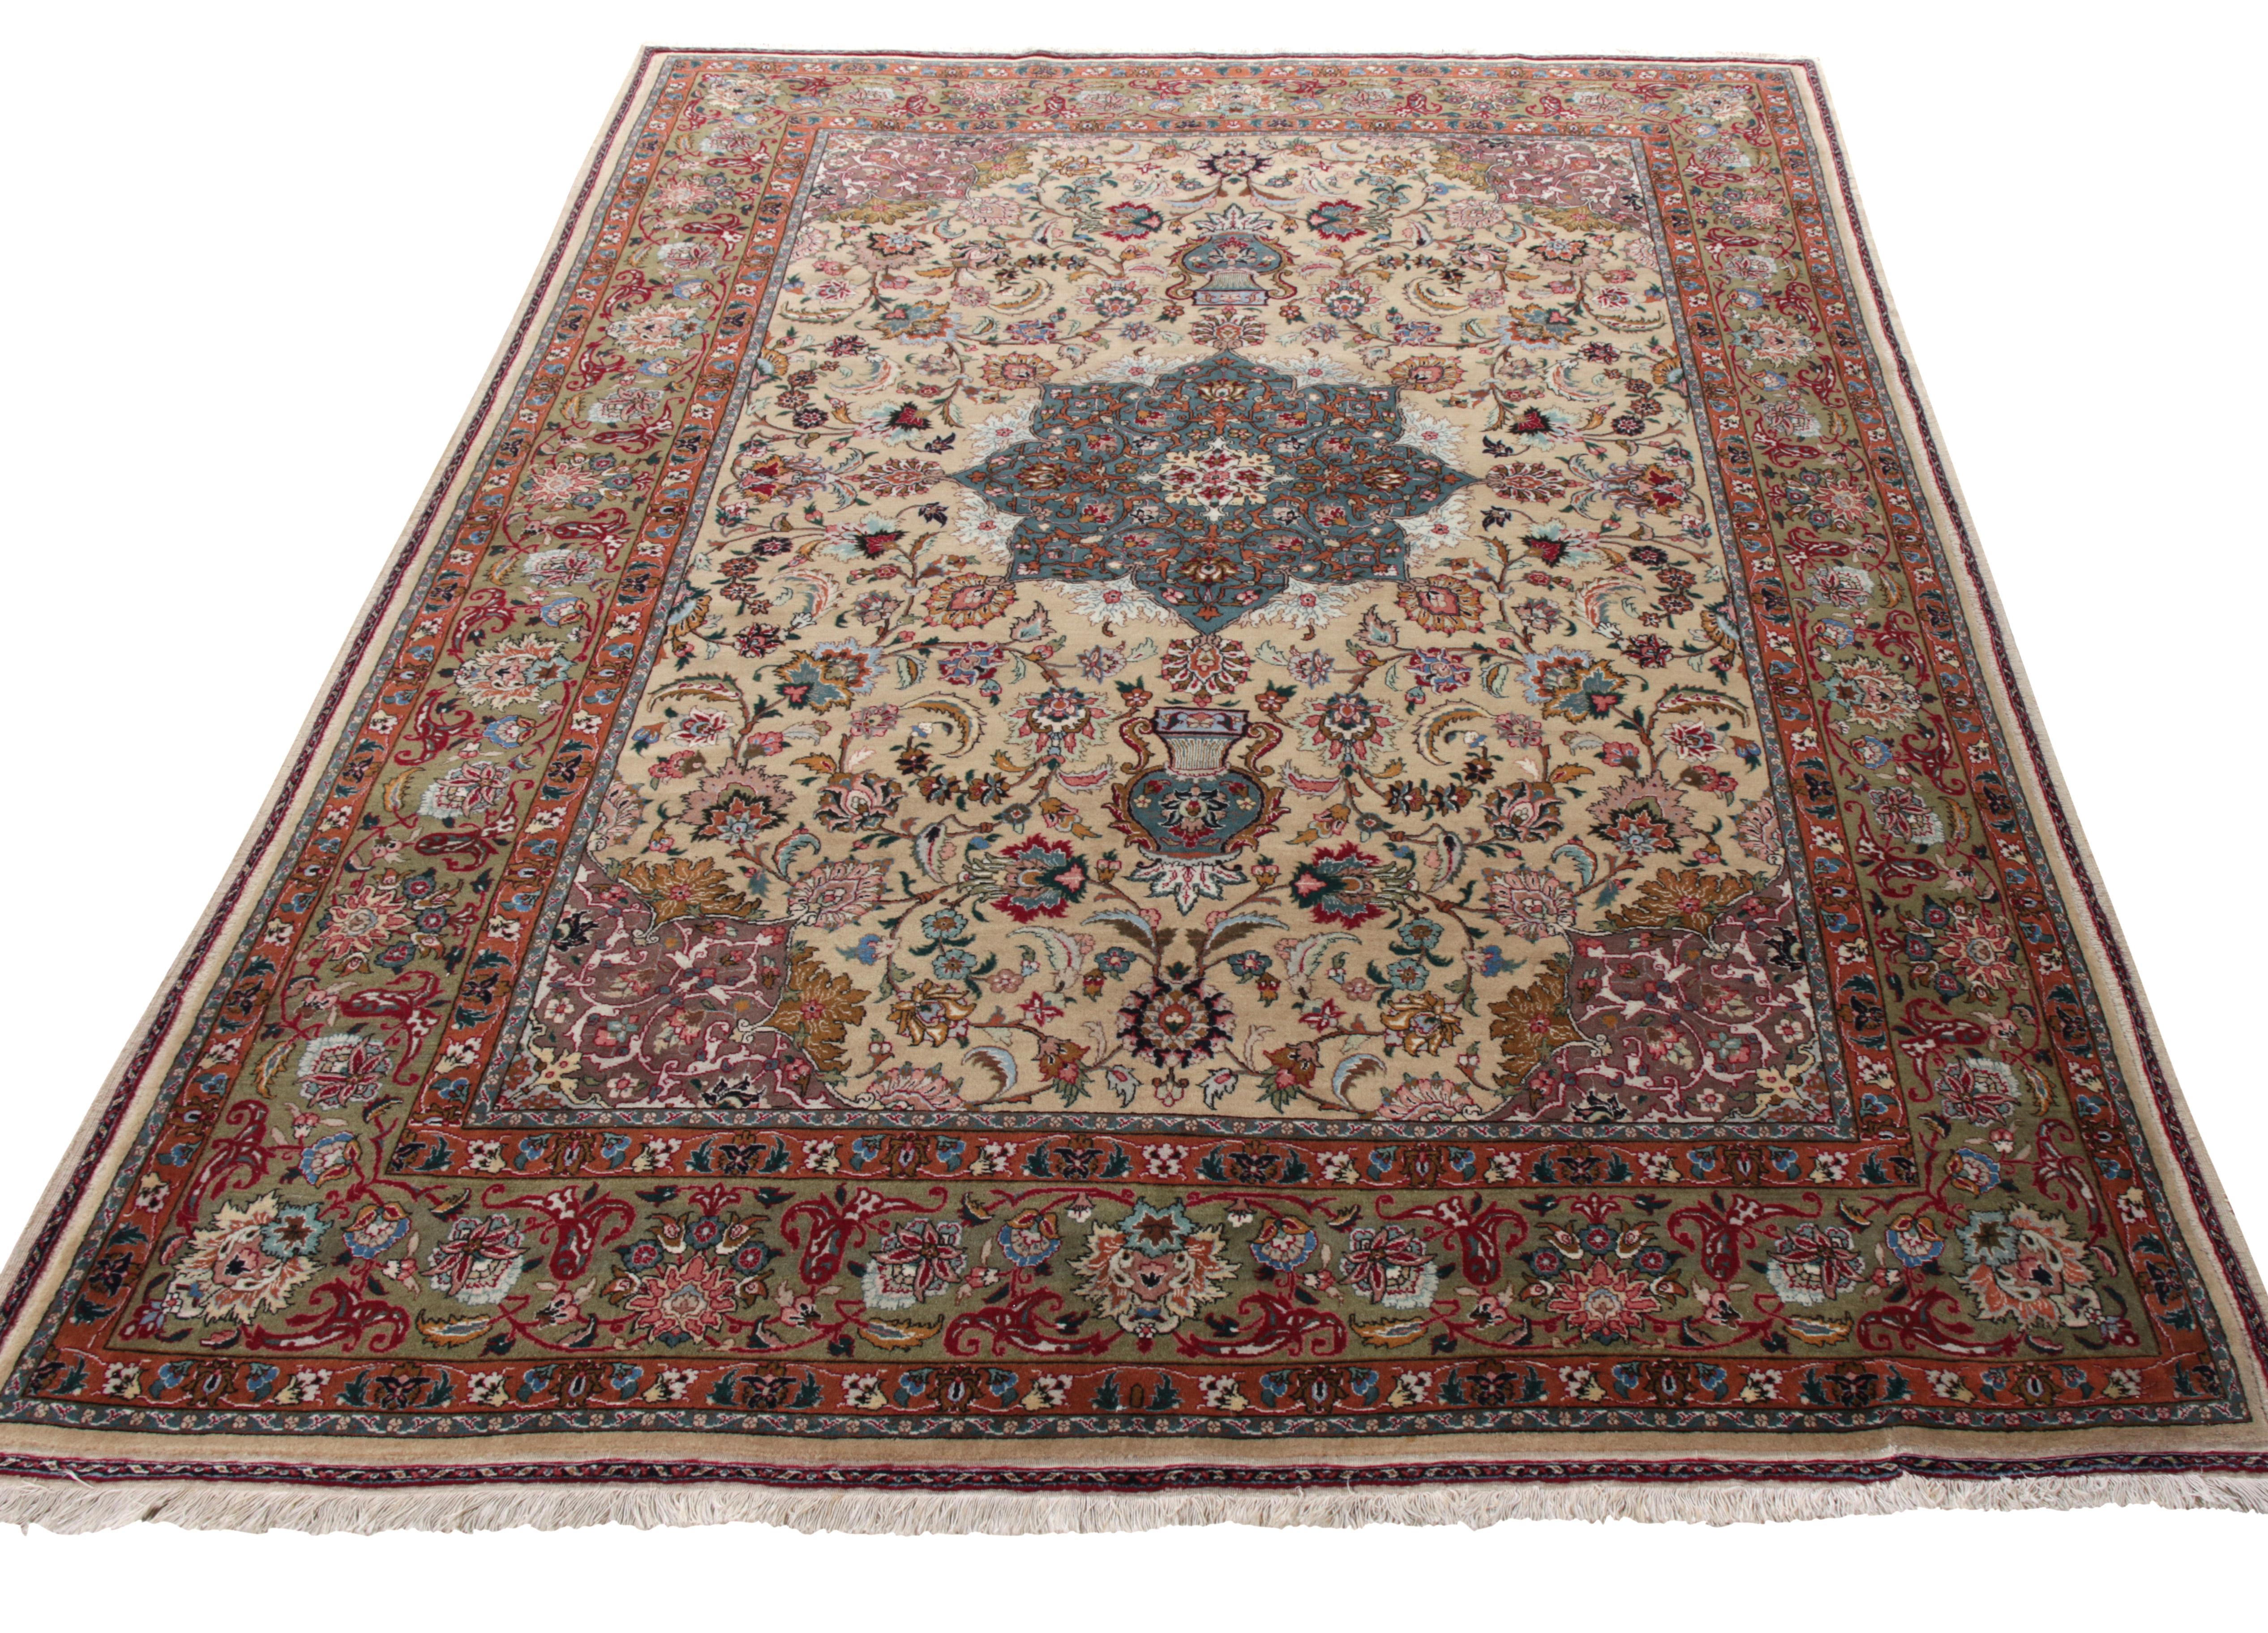 Originating from Persia circa 1950-1960, this hand-knotted vintage Tabriz rug makes a splendid entry to Rug & Kilim’s Antique & Vintage collection. The medallion pattern in royal blue immediately catches the eye and leads the focus towards the